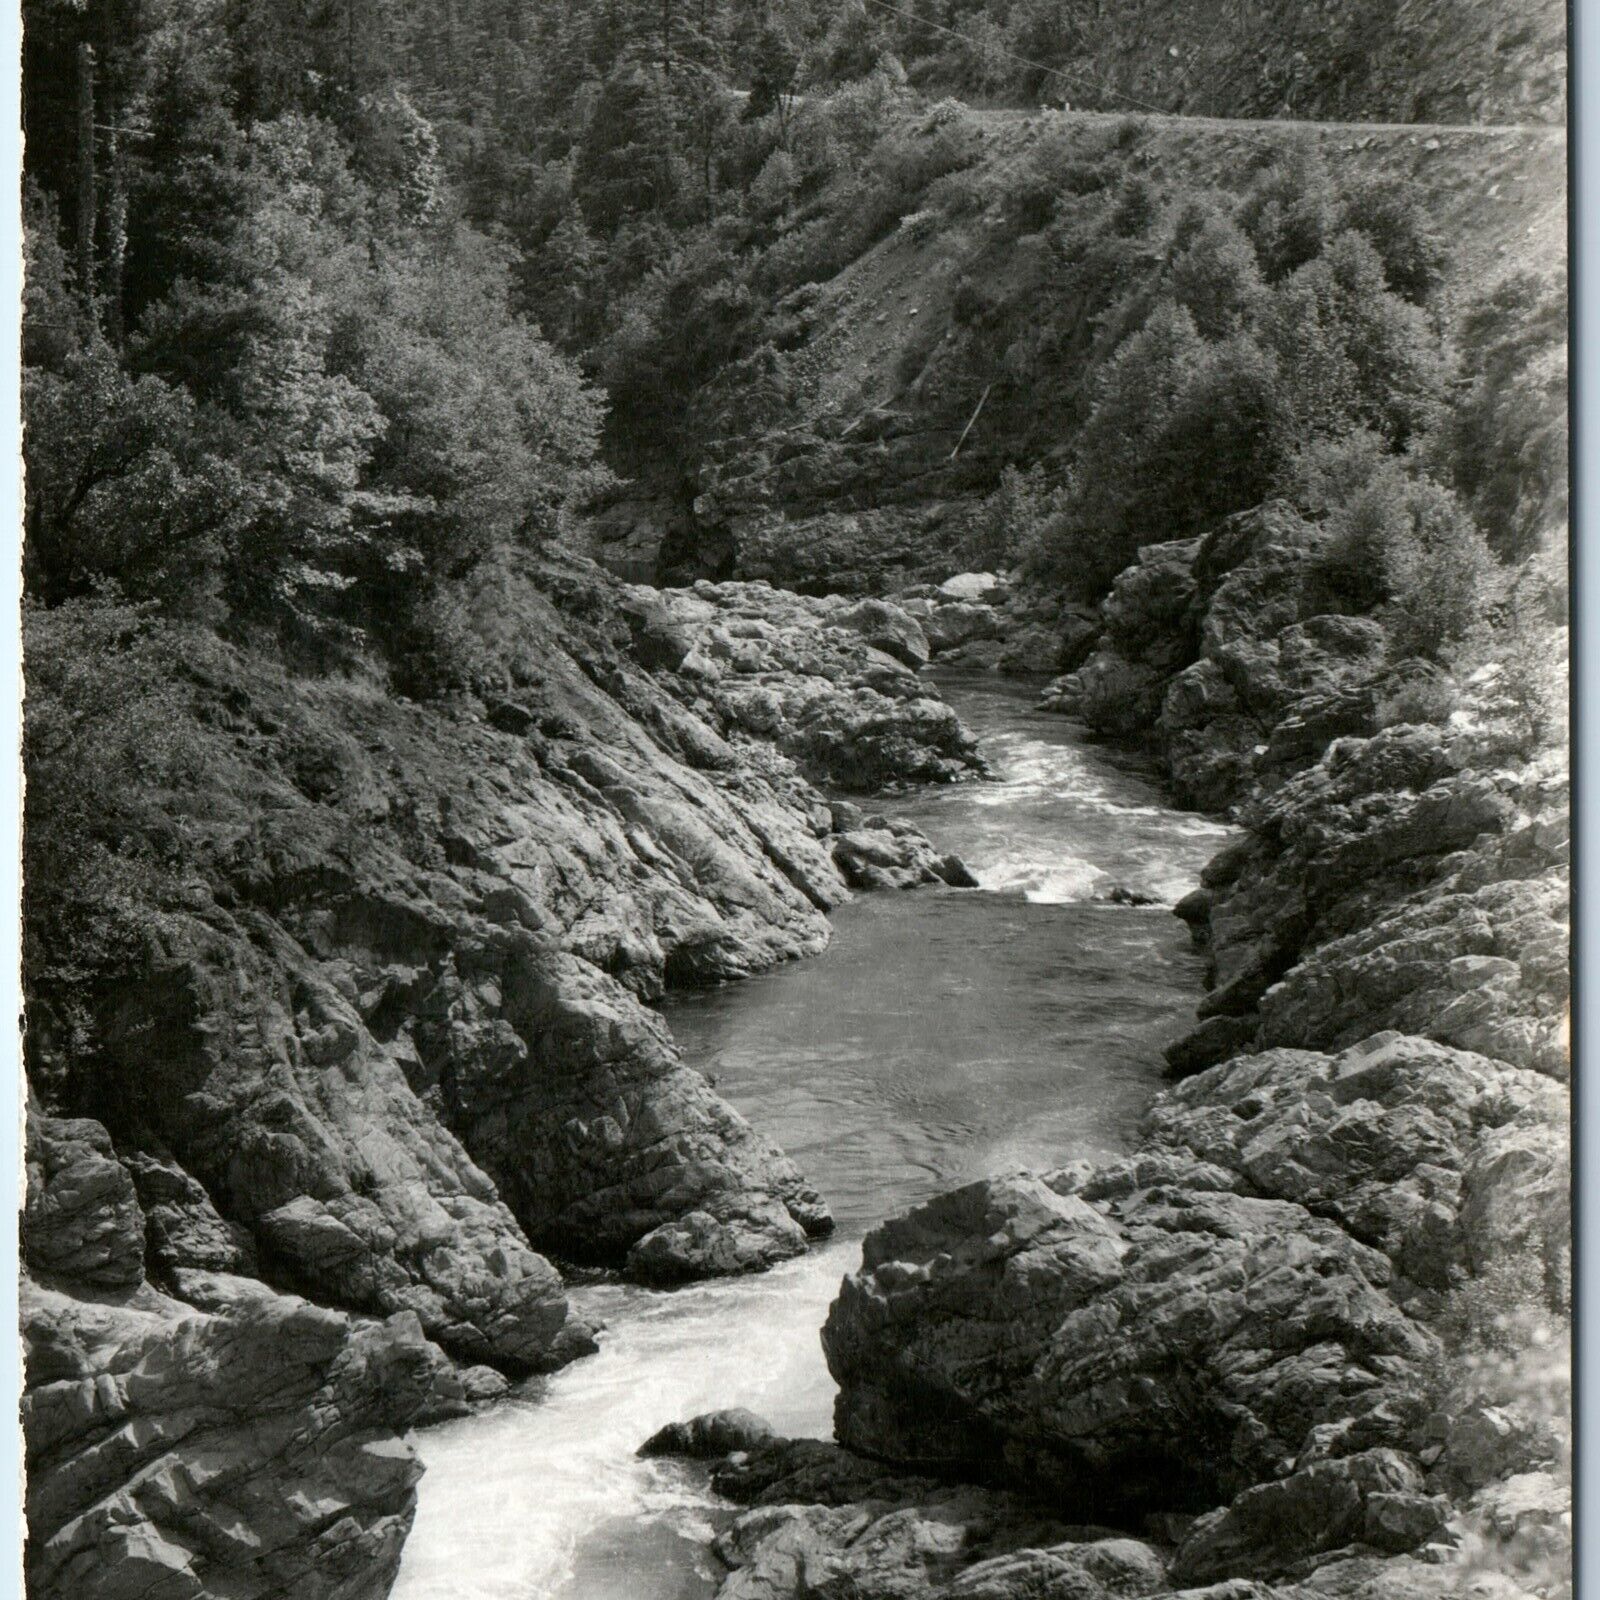 c1950s CA Redwood Highway RPPC Smith River Canyon Scenic Real Photo Art Ray A166